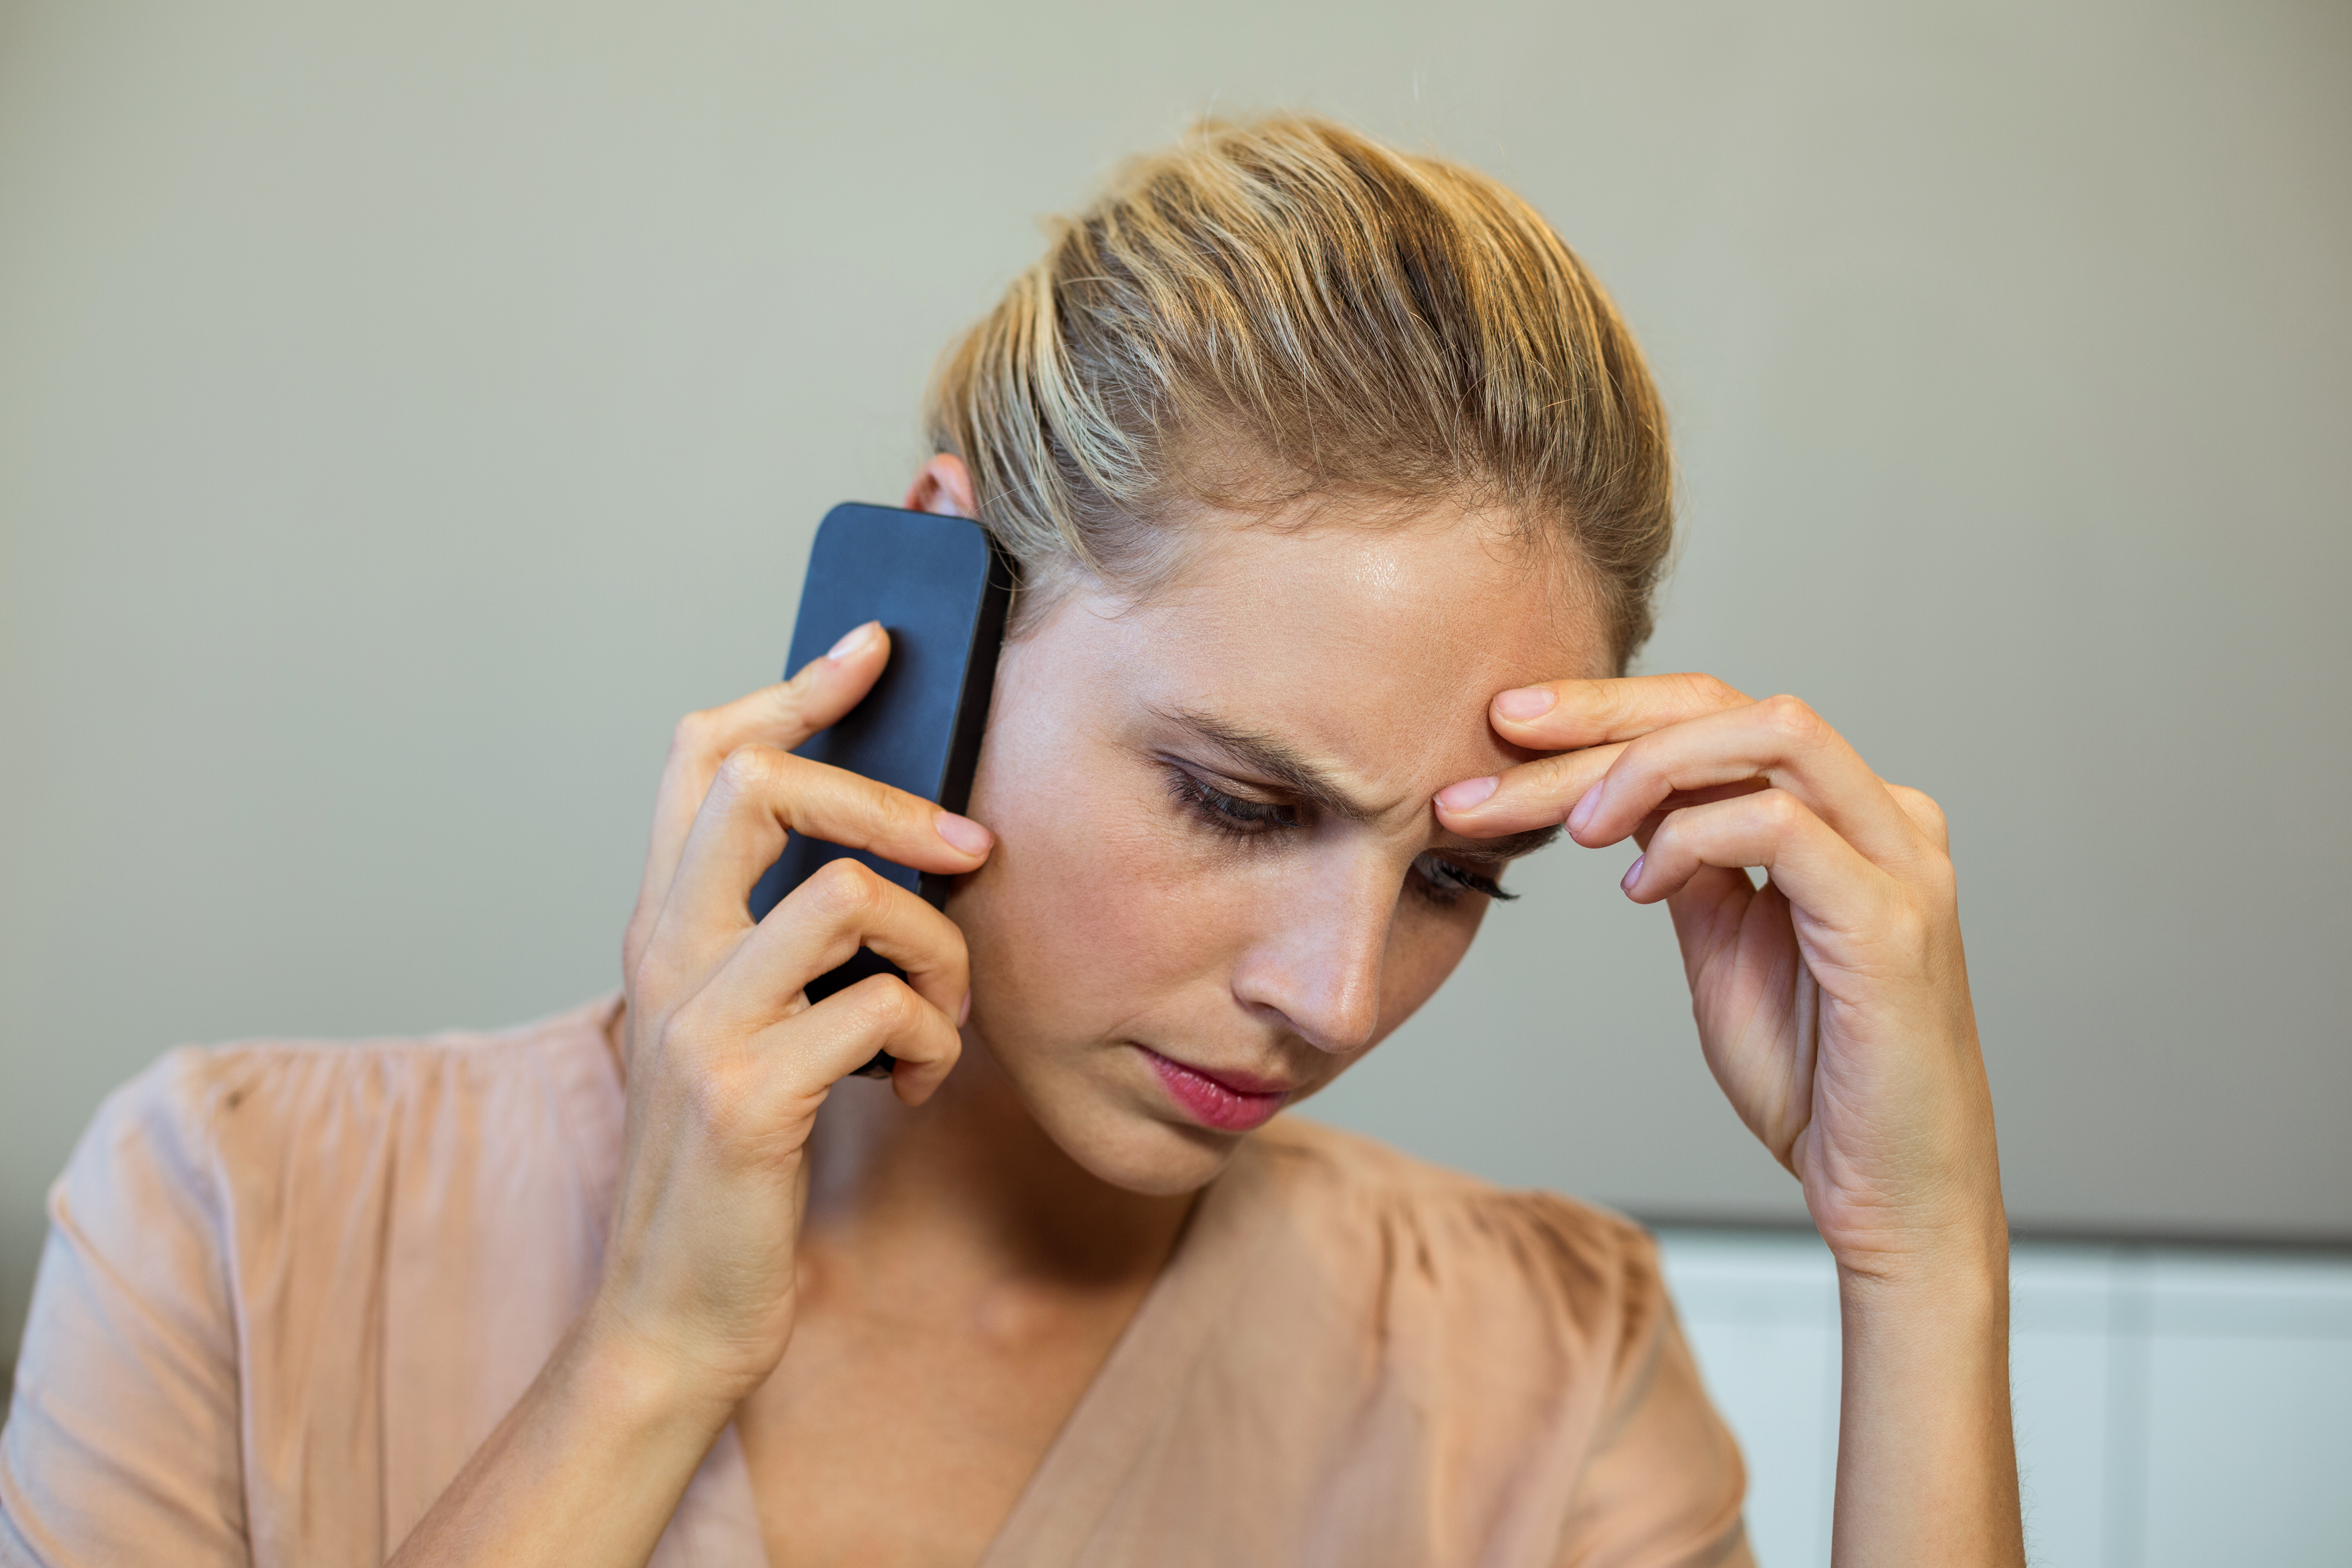 A woman on the phone | Source: Shutterstock